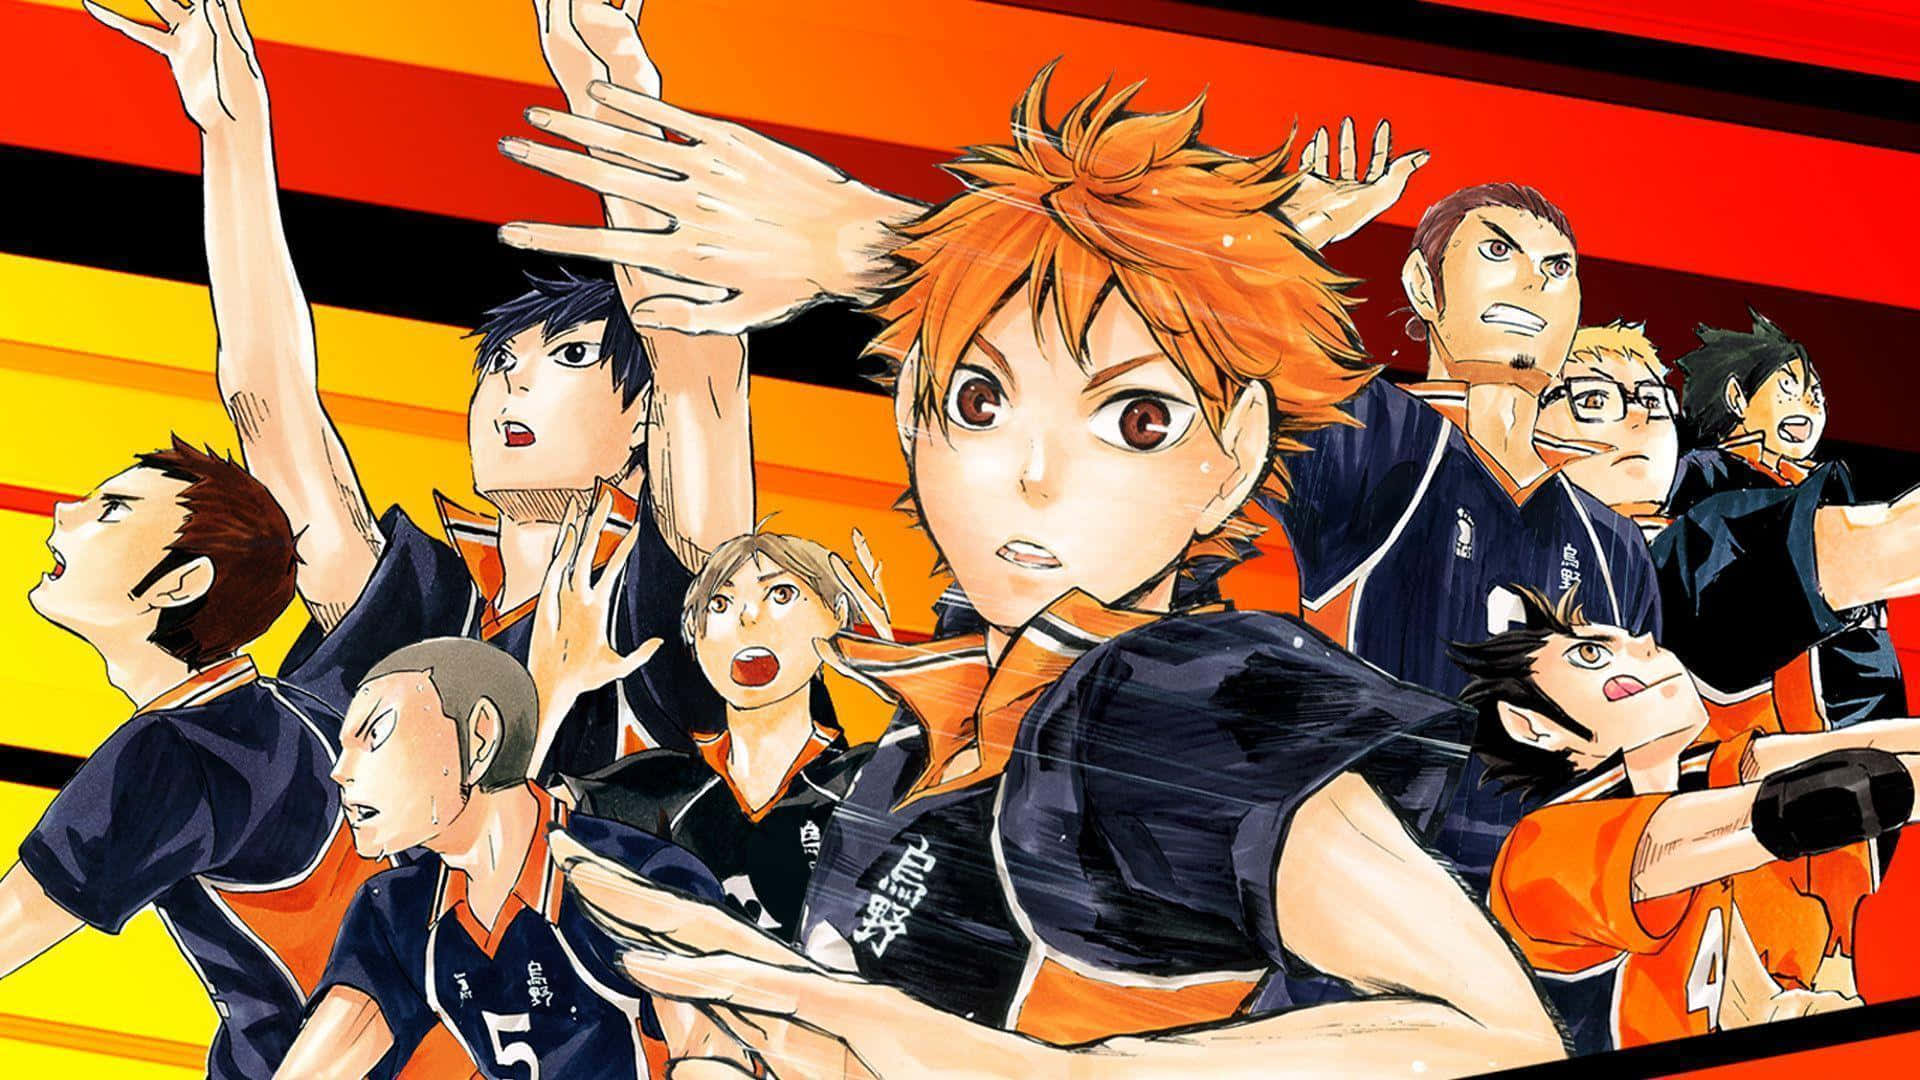 The Most Creative Haikyuu Volleyball Actions (HD) 